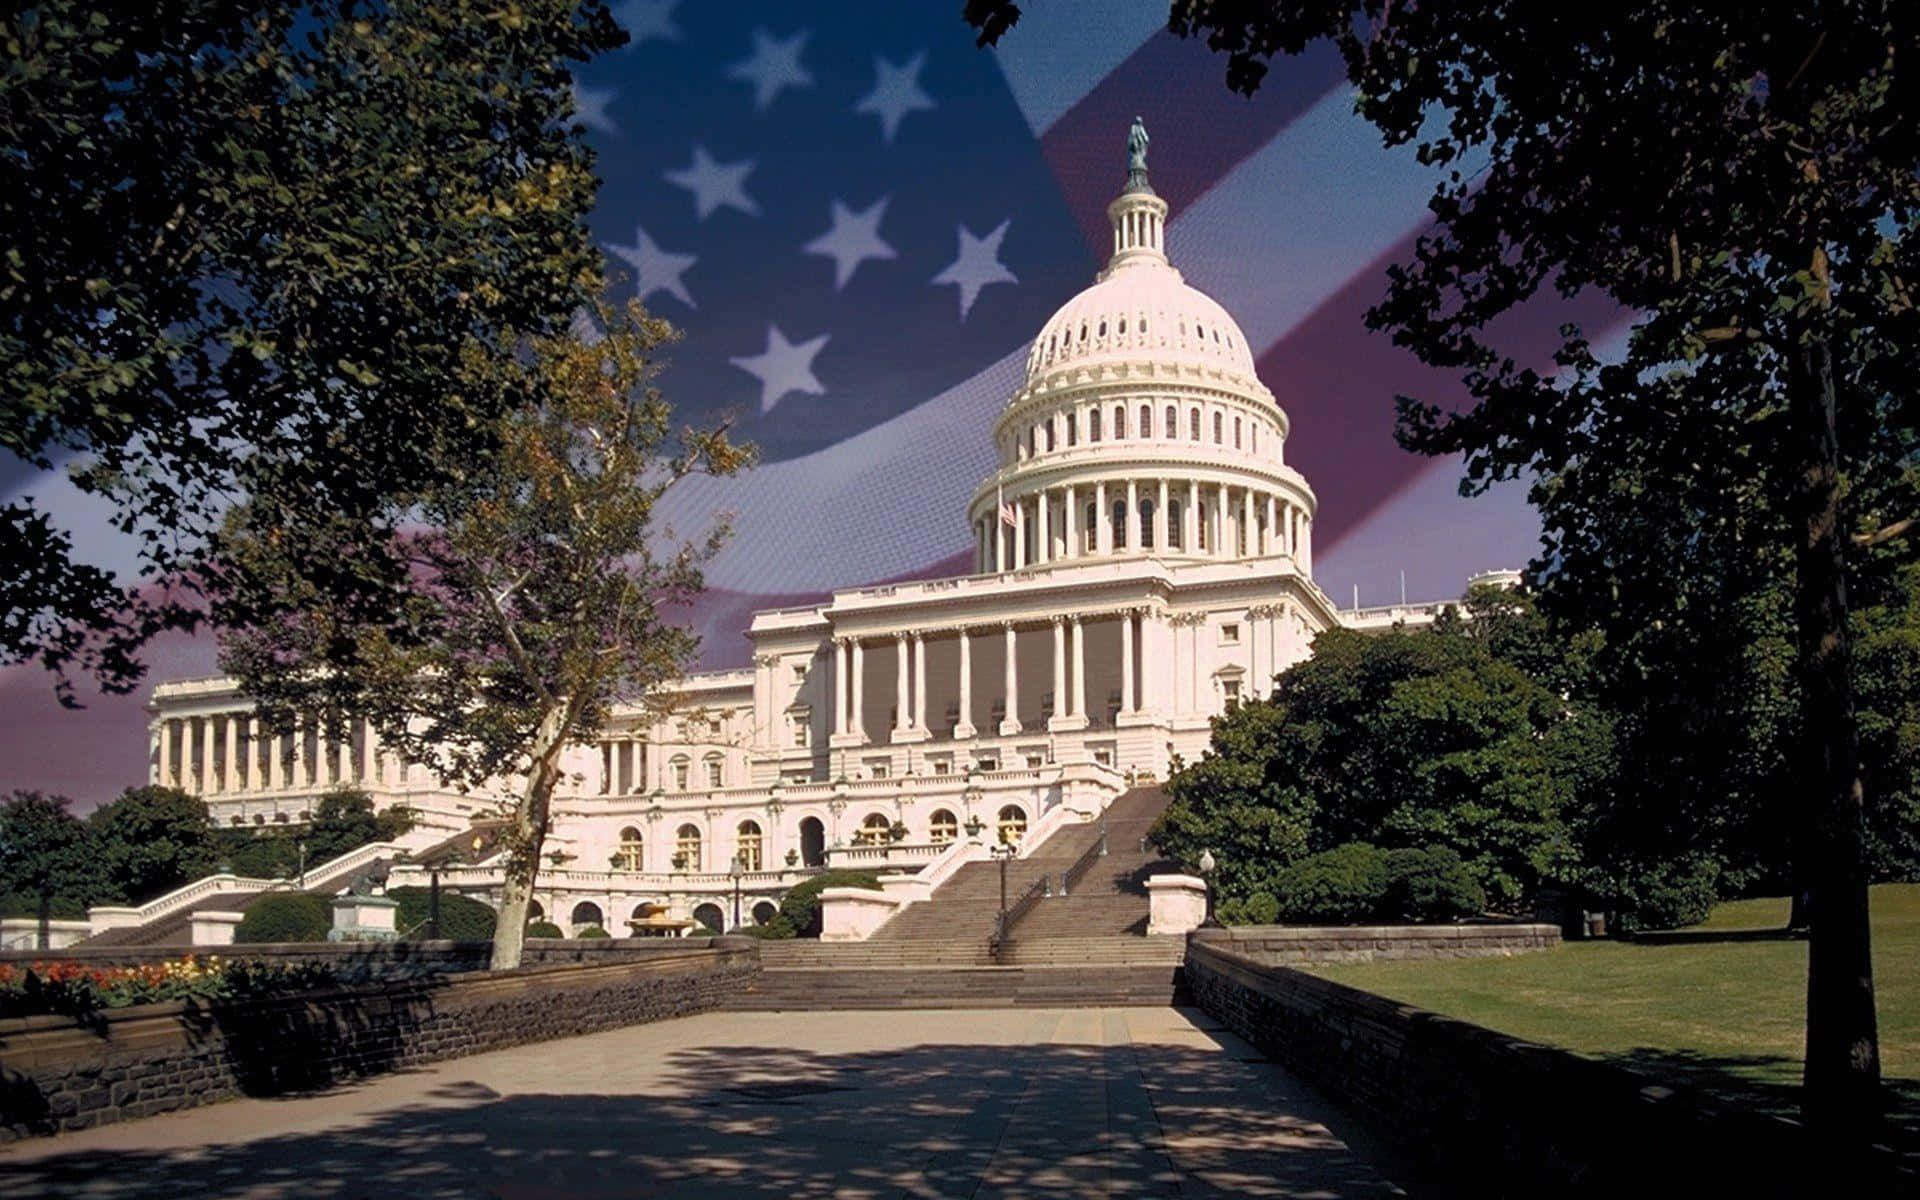 The United States Capitol Building With An American Flag